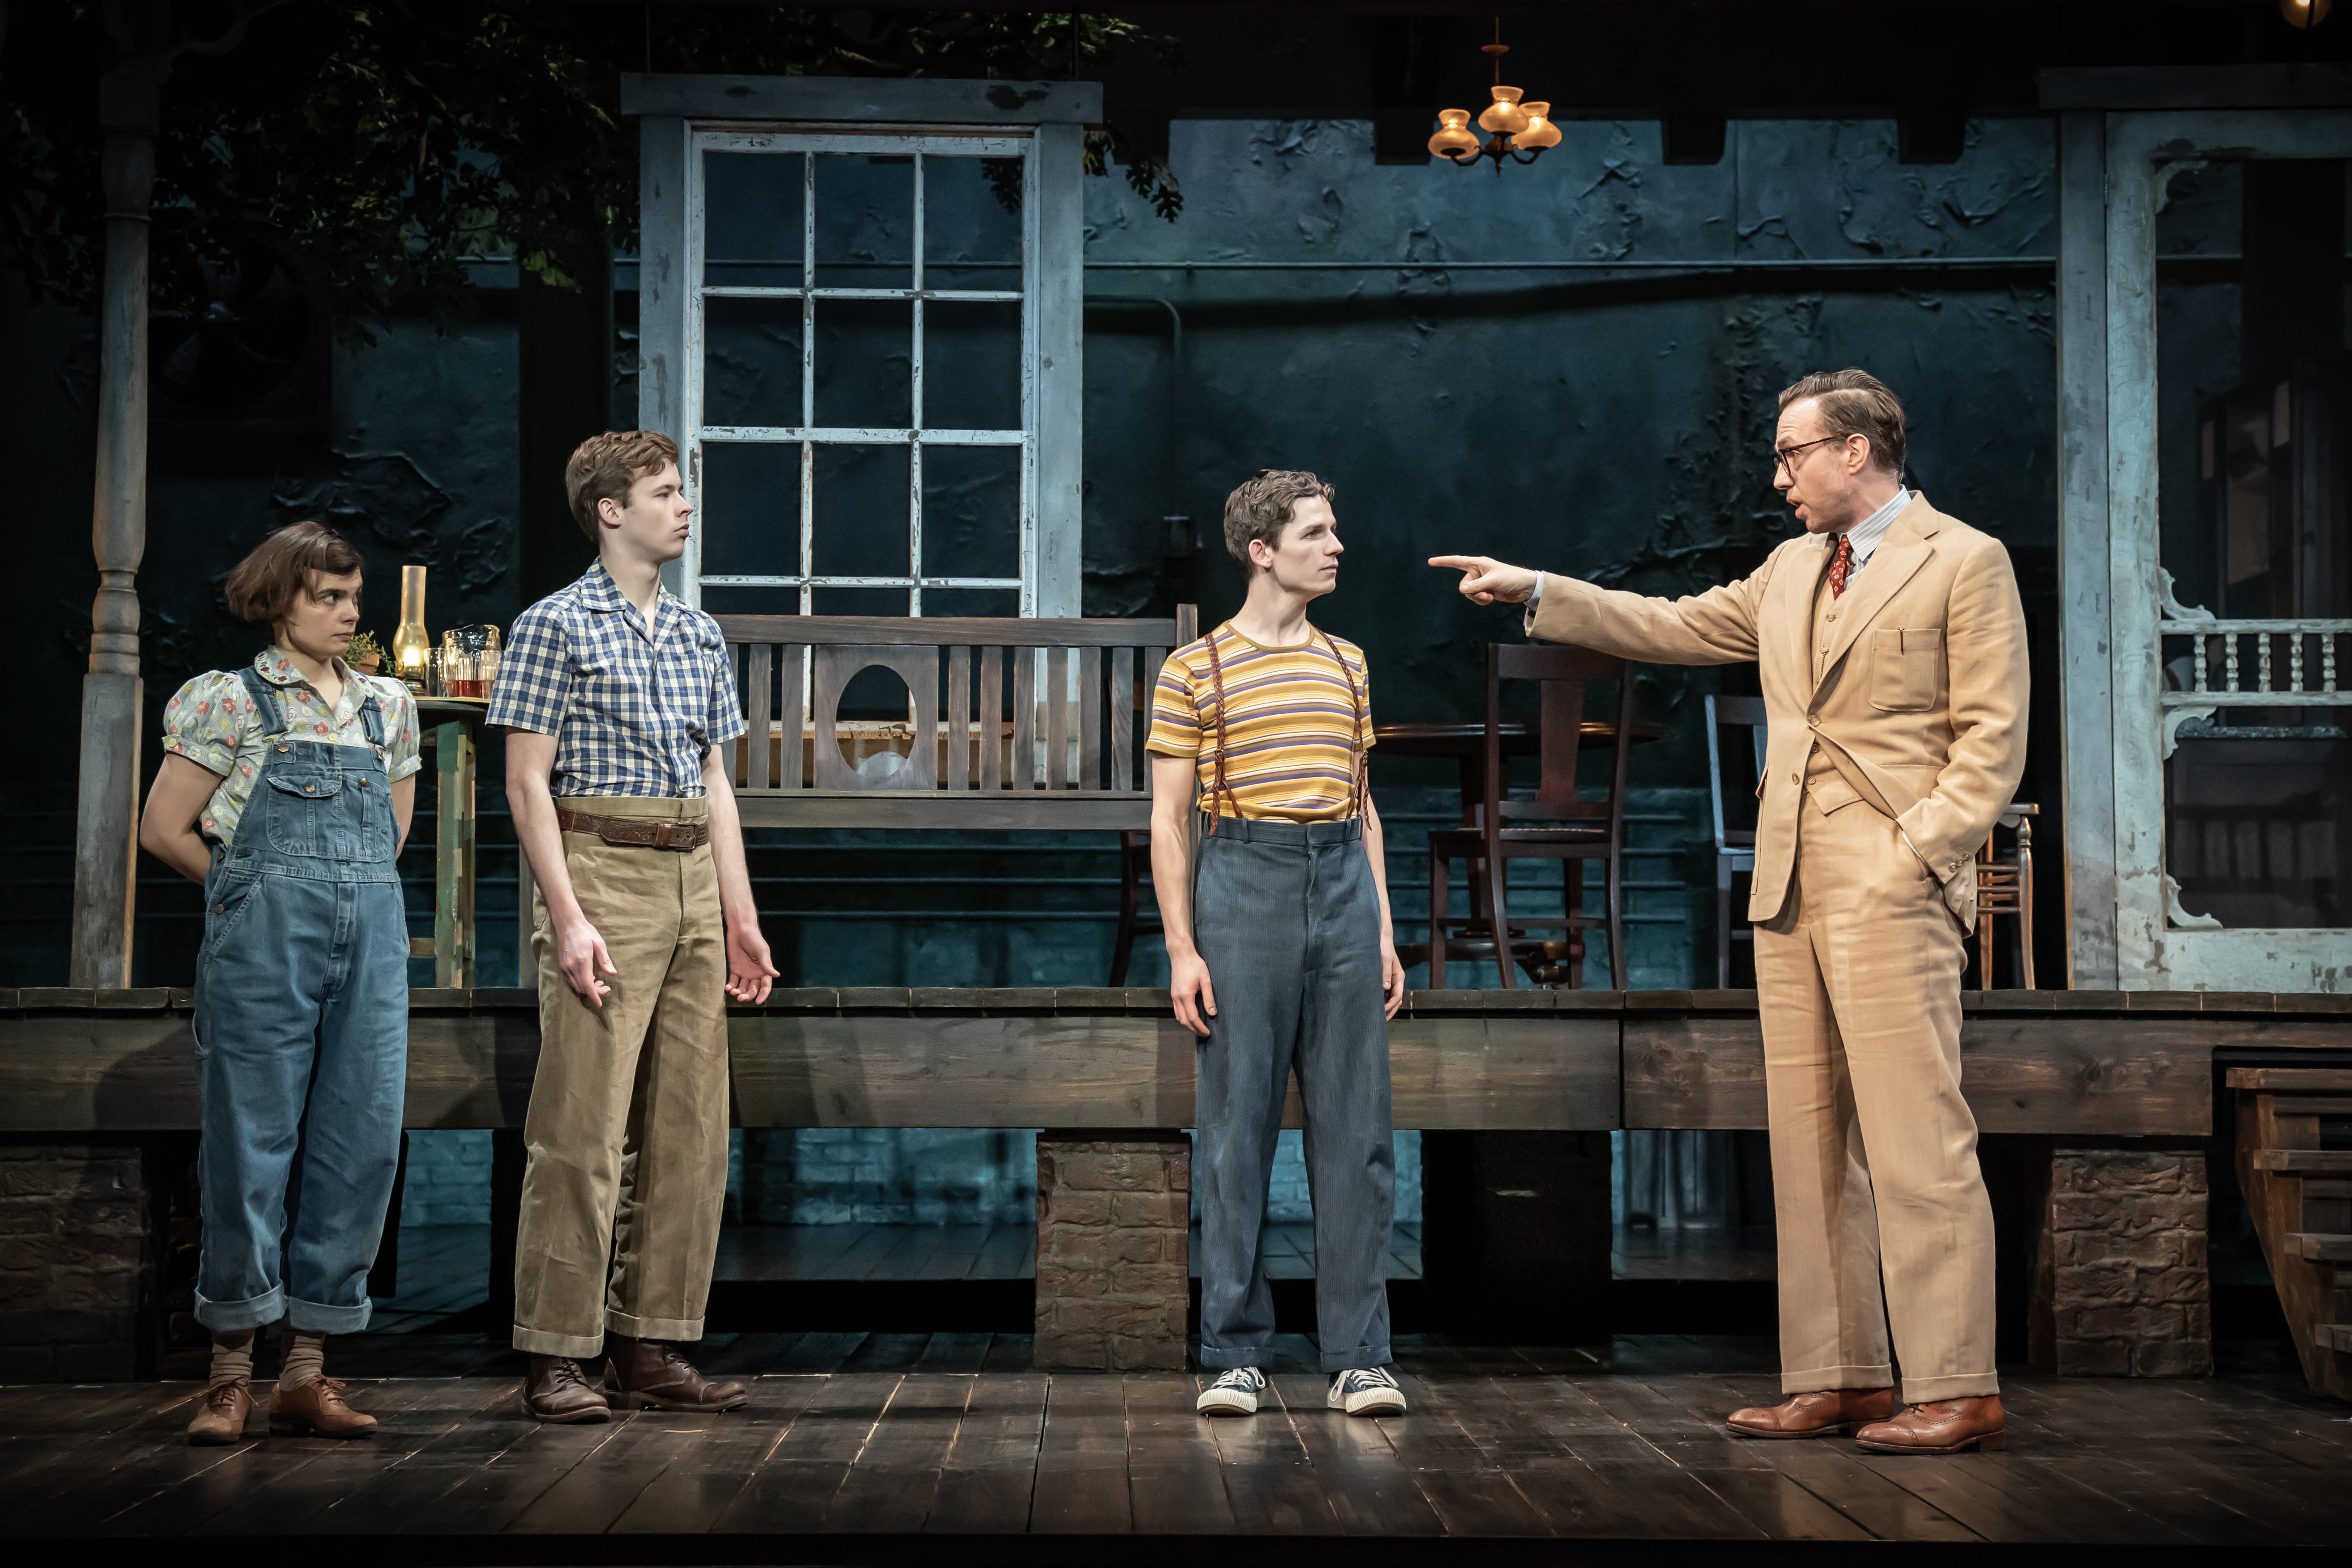 Spall crushed it on stage as Atticus Finch in ‘ To Kill a Mockingbird’